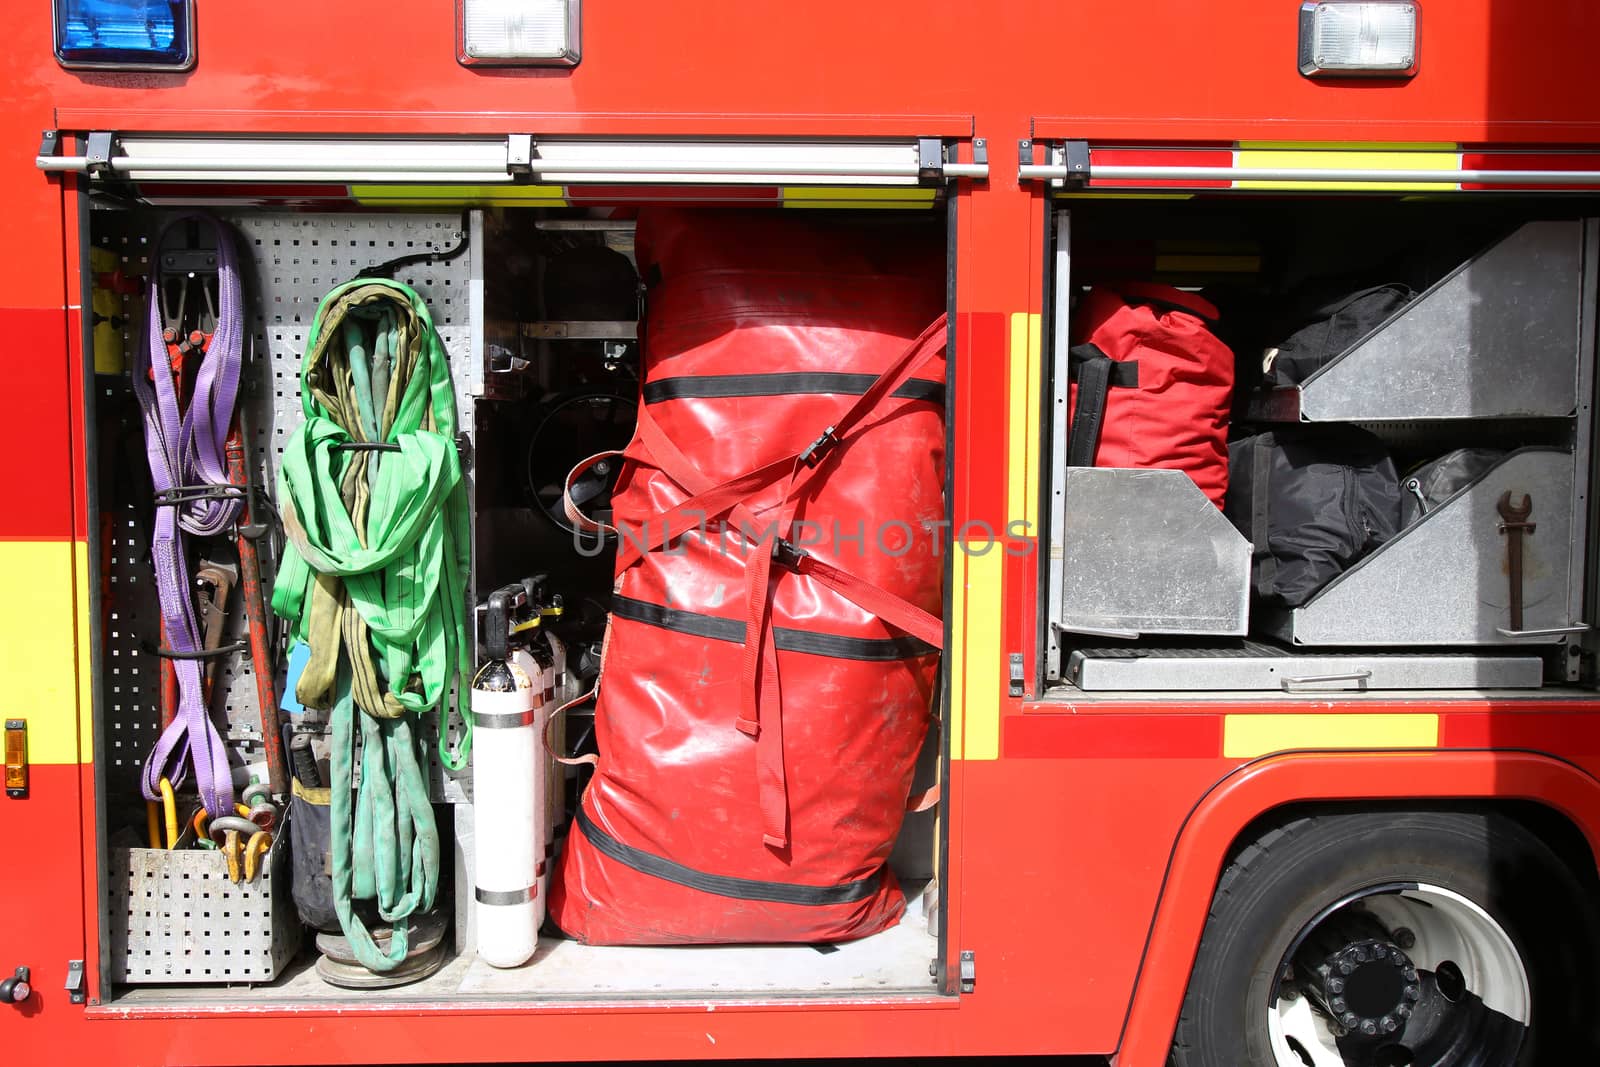 Rescue Equipment Inside packed inside a fire truck by vladacanon